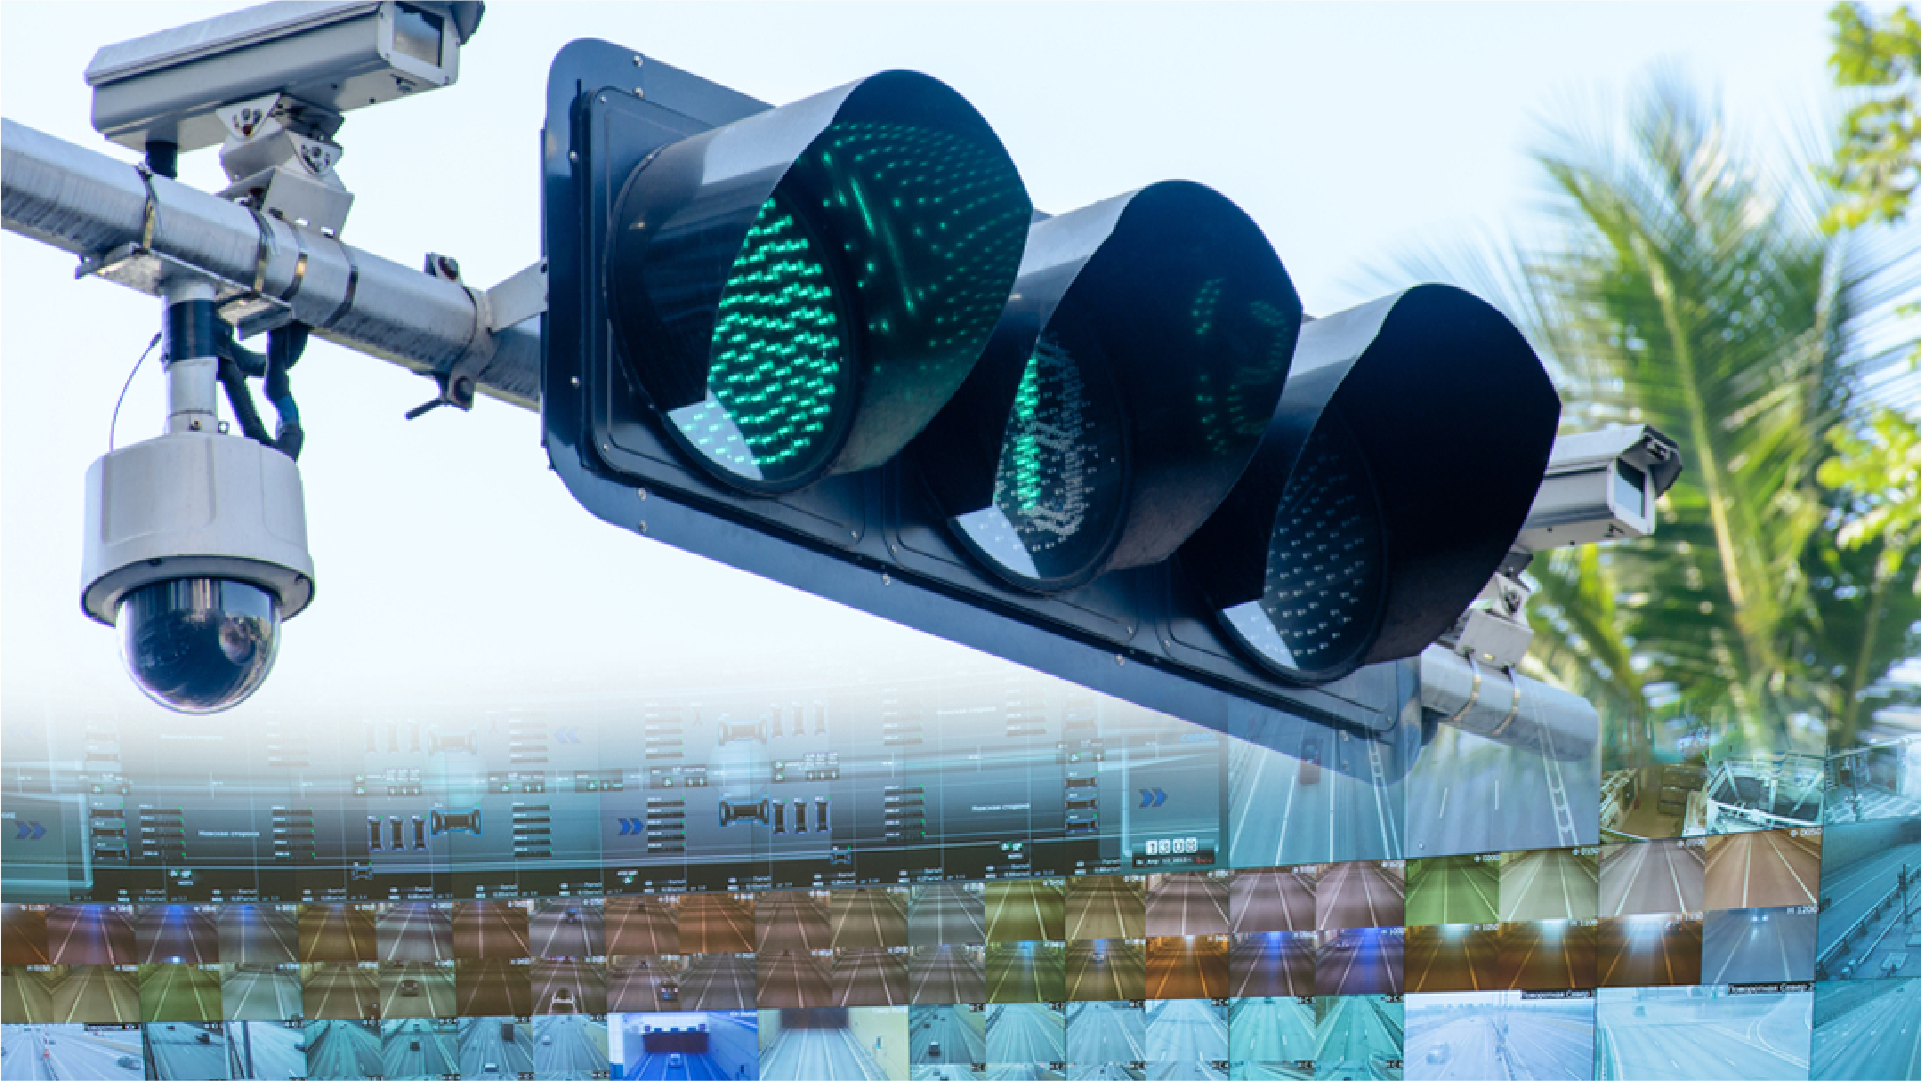 Maintenance of Traffic Signals and ITS Field Systems in the Abu Dhabi and Al Dhafra Region